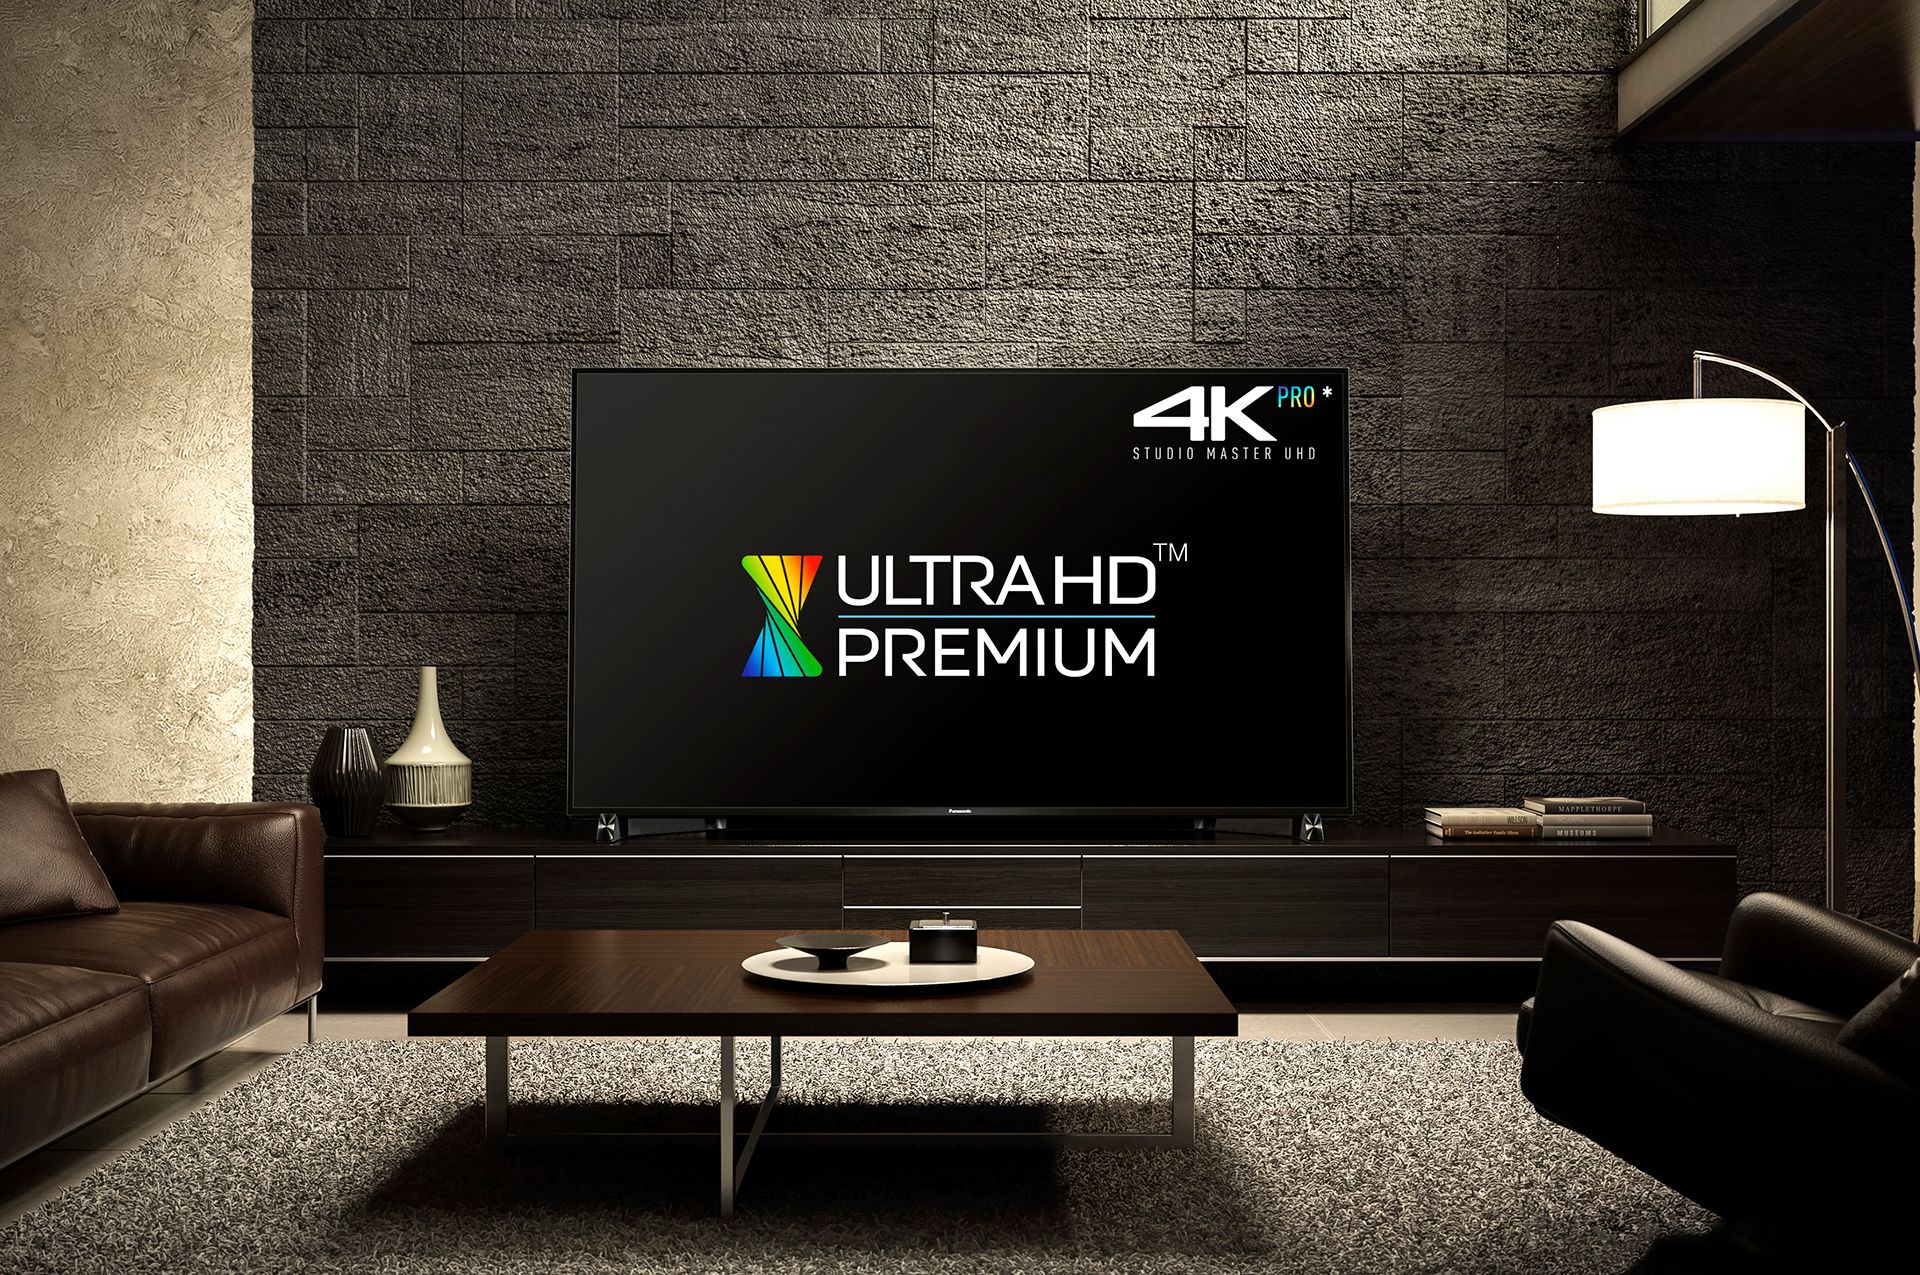 want a premium 4k experience panasonic dx900 is first to market ultra hd premium tv image 1